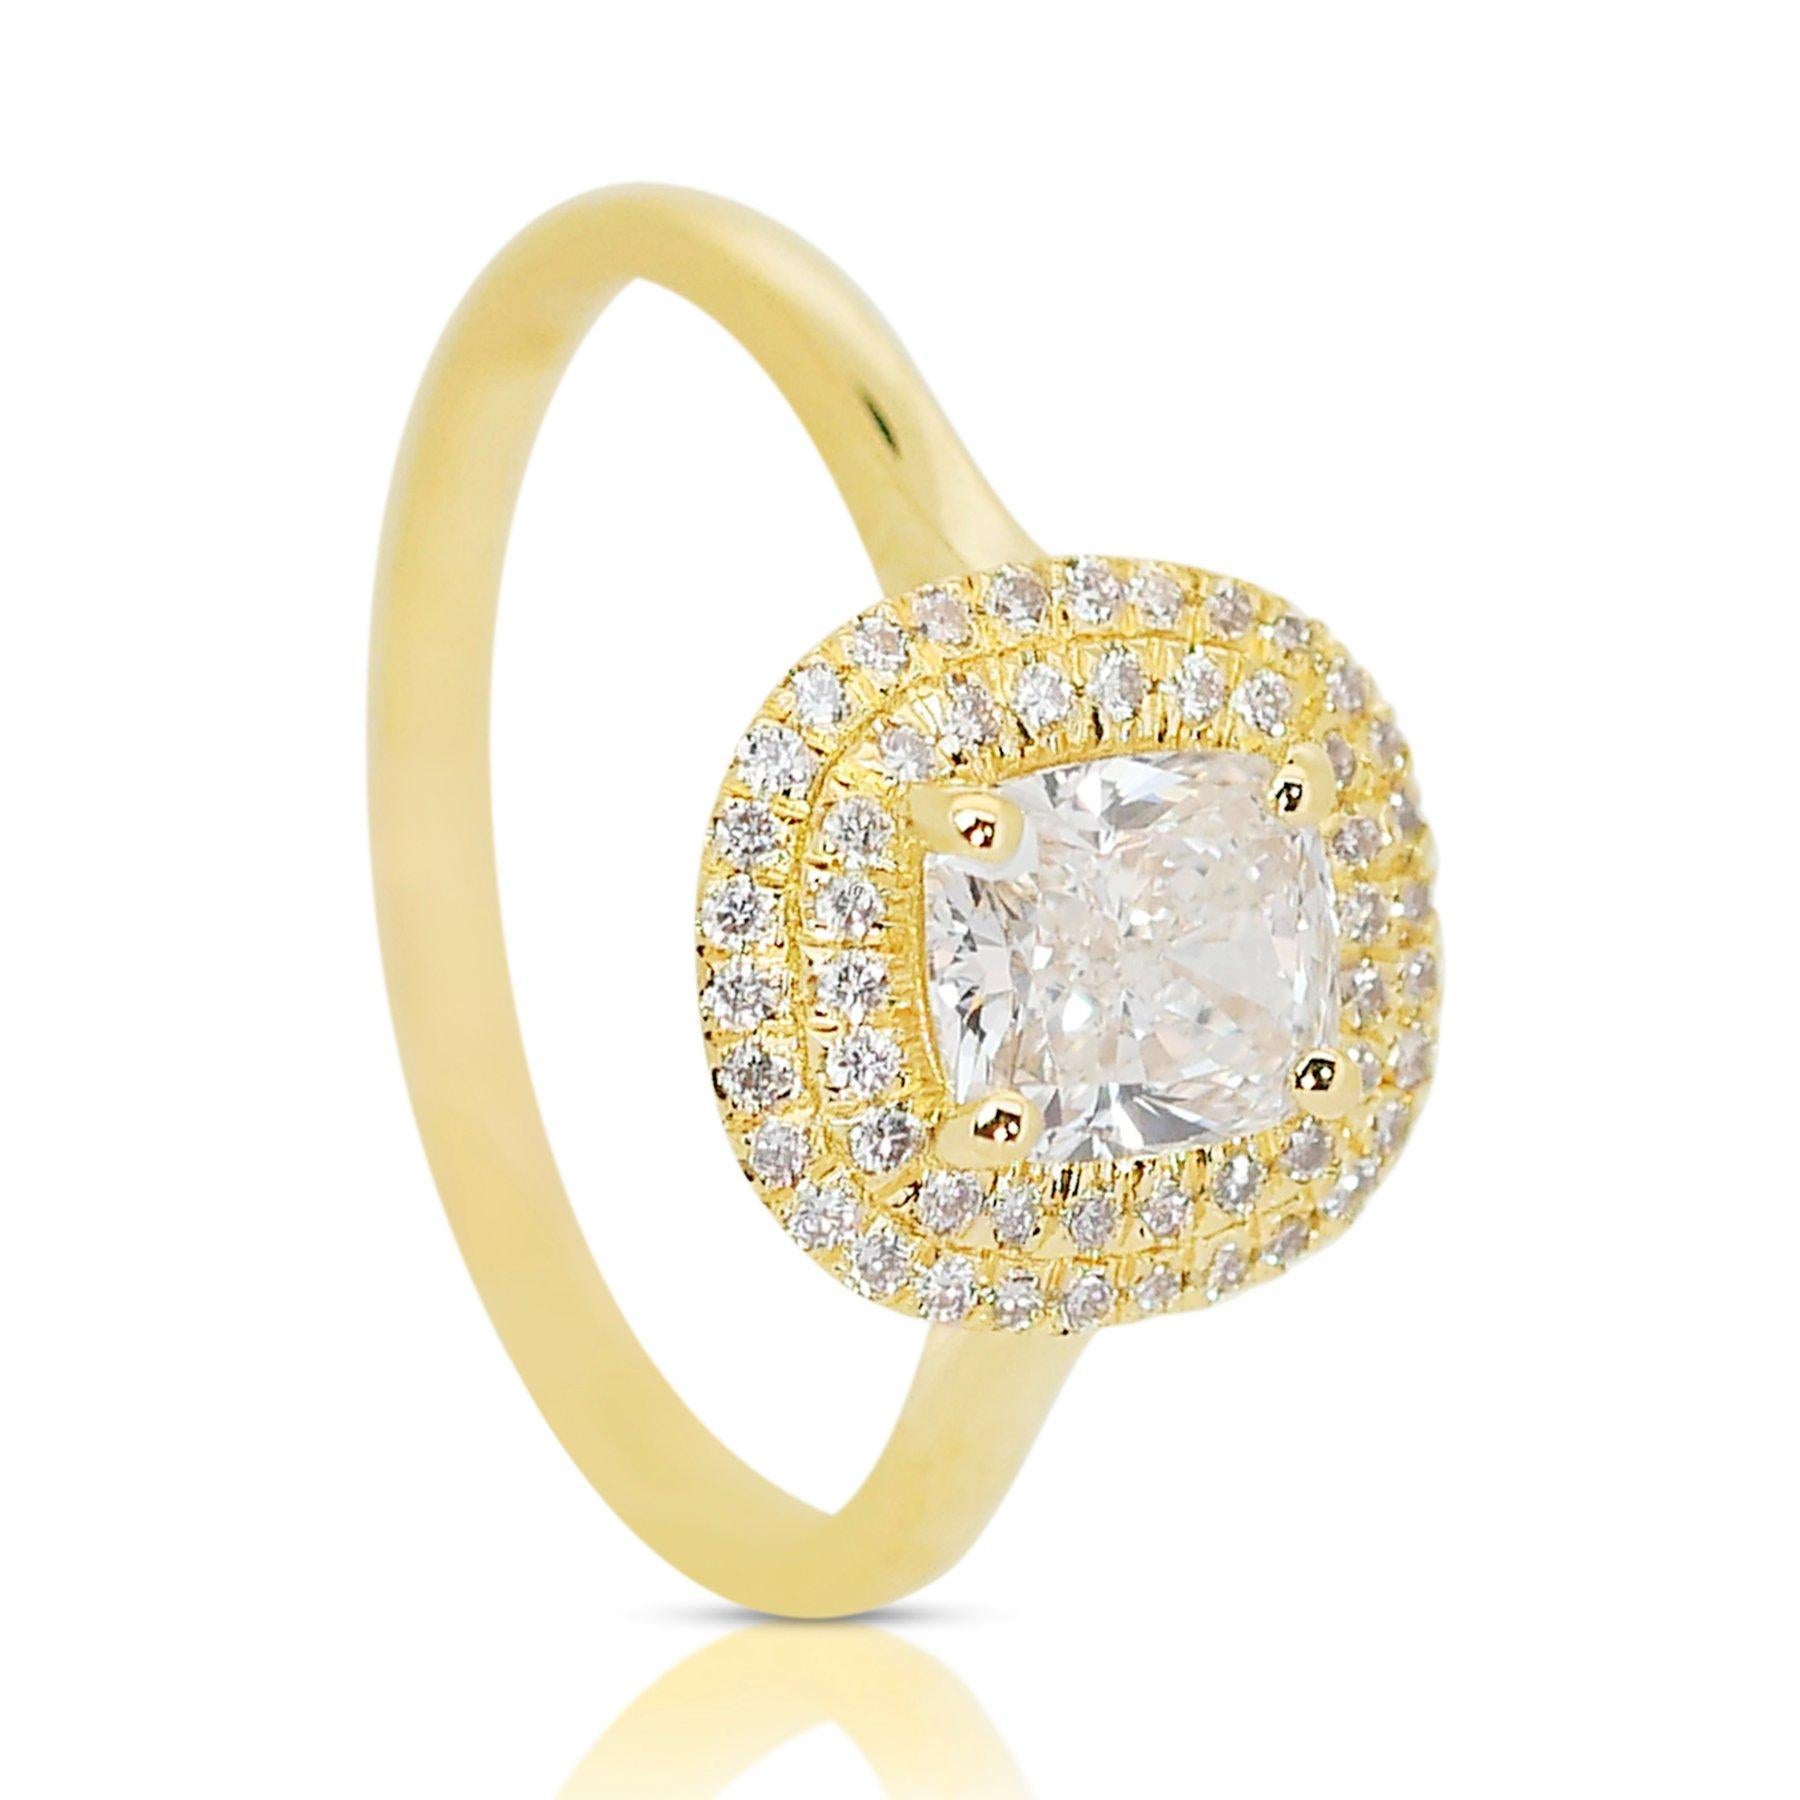 Cushion Cut Majestic 1.78ct Diamond Halo Ring in 18k Yellow Gold - GIA Certified For Sale